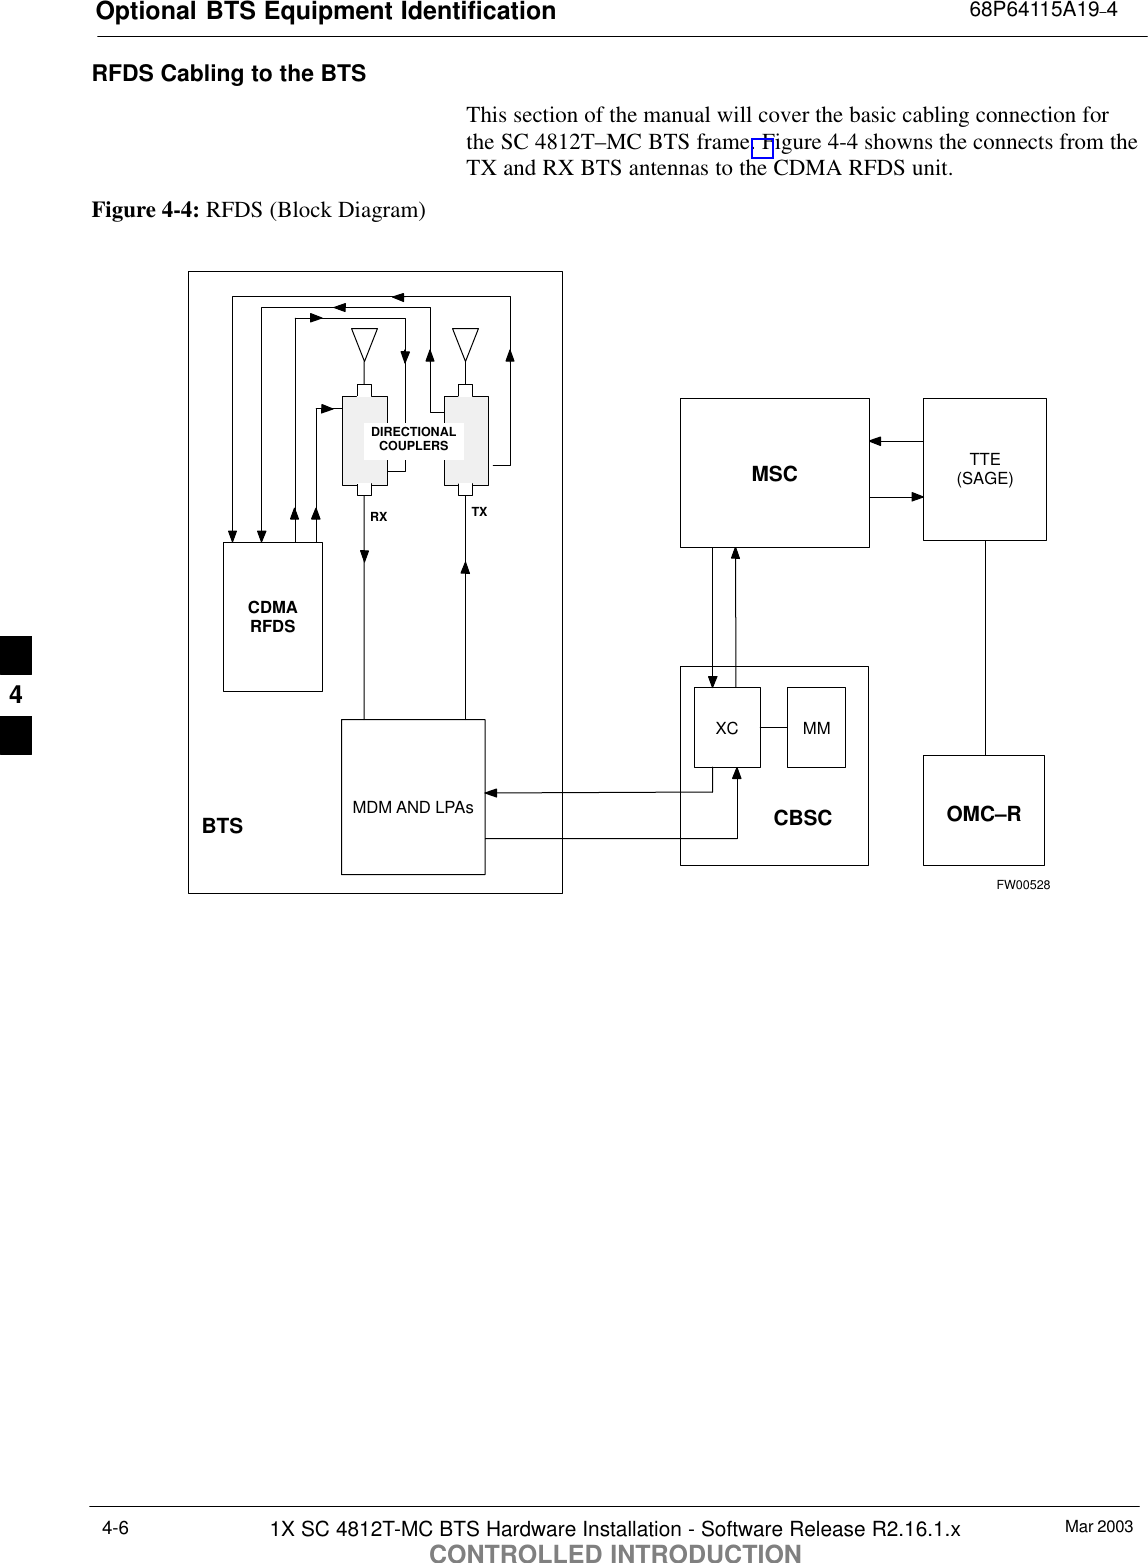 Optional BTS Equipment Identification 68P64115A19–4Mar 20031X SC 4812T-MC BTS Hardware Installation - Software Release R2.16.1.xCONTROLLED INTRODUCTION4-6RFDS Cabling to the BTSThis section of the manual will cover the basic cabling connection forthe SC 4812T–MC BTS frame. Figure 4-4 showns the connects from theTX and RX BTS antennas to the CDMA RFDS unit.Figure 4-4: RFDS (Block Diagram)OMC–RTTE(SAGE)CBSCMDM AND LPAsBTSXC MMCDMARFDSMSCDIRECTIONALCOUPLERSRX TXFW005284